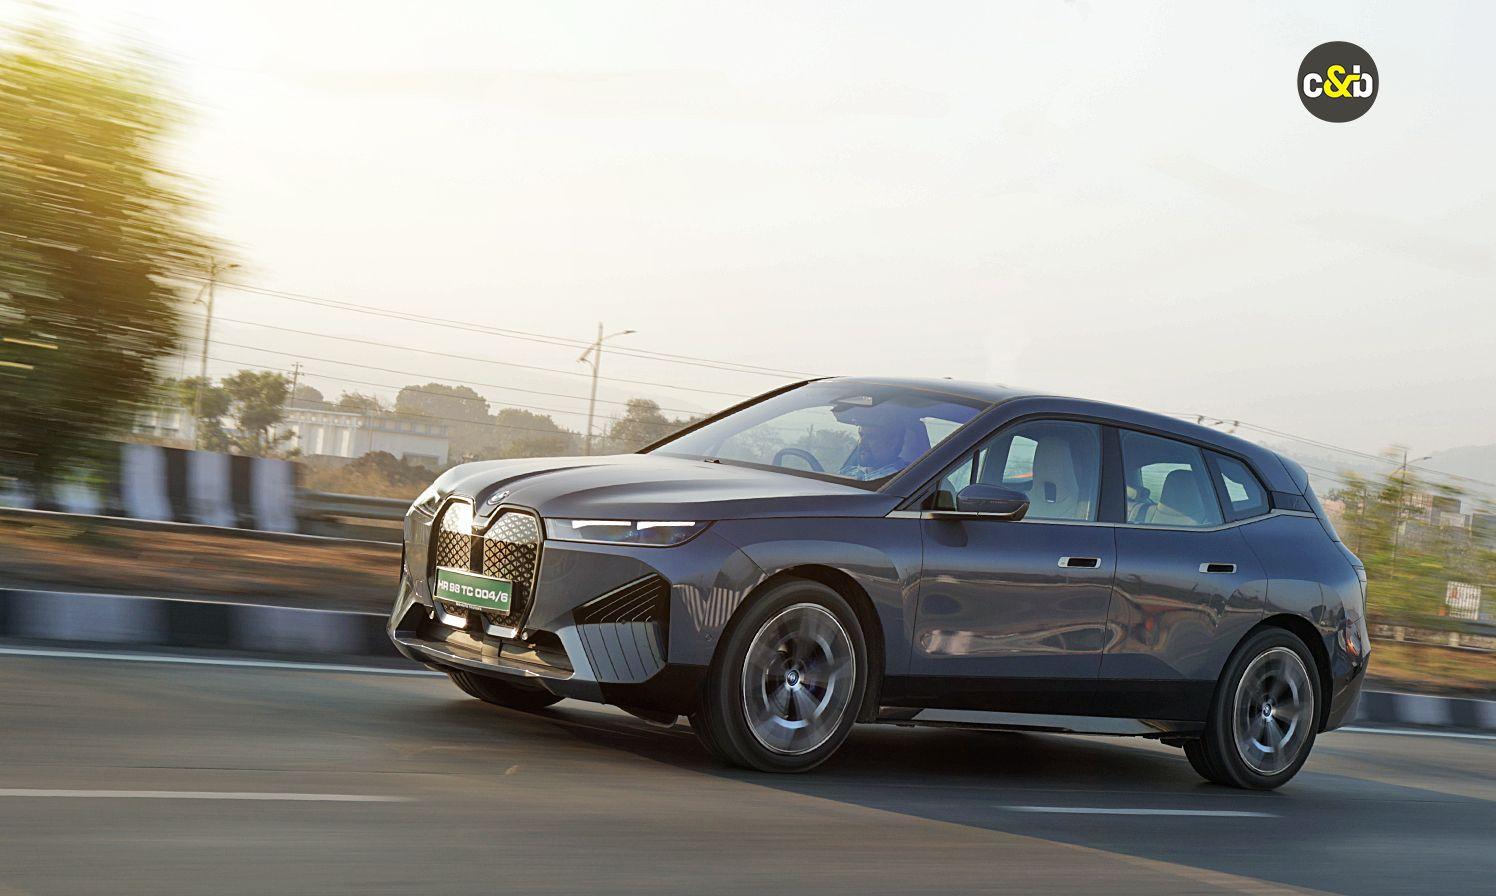 BMW’s flagship electric SUV gets added power, greater range and more kit in new top variant.